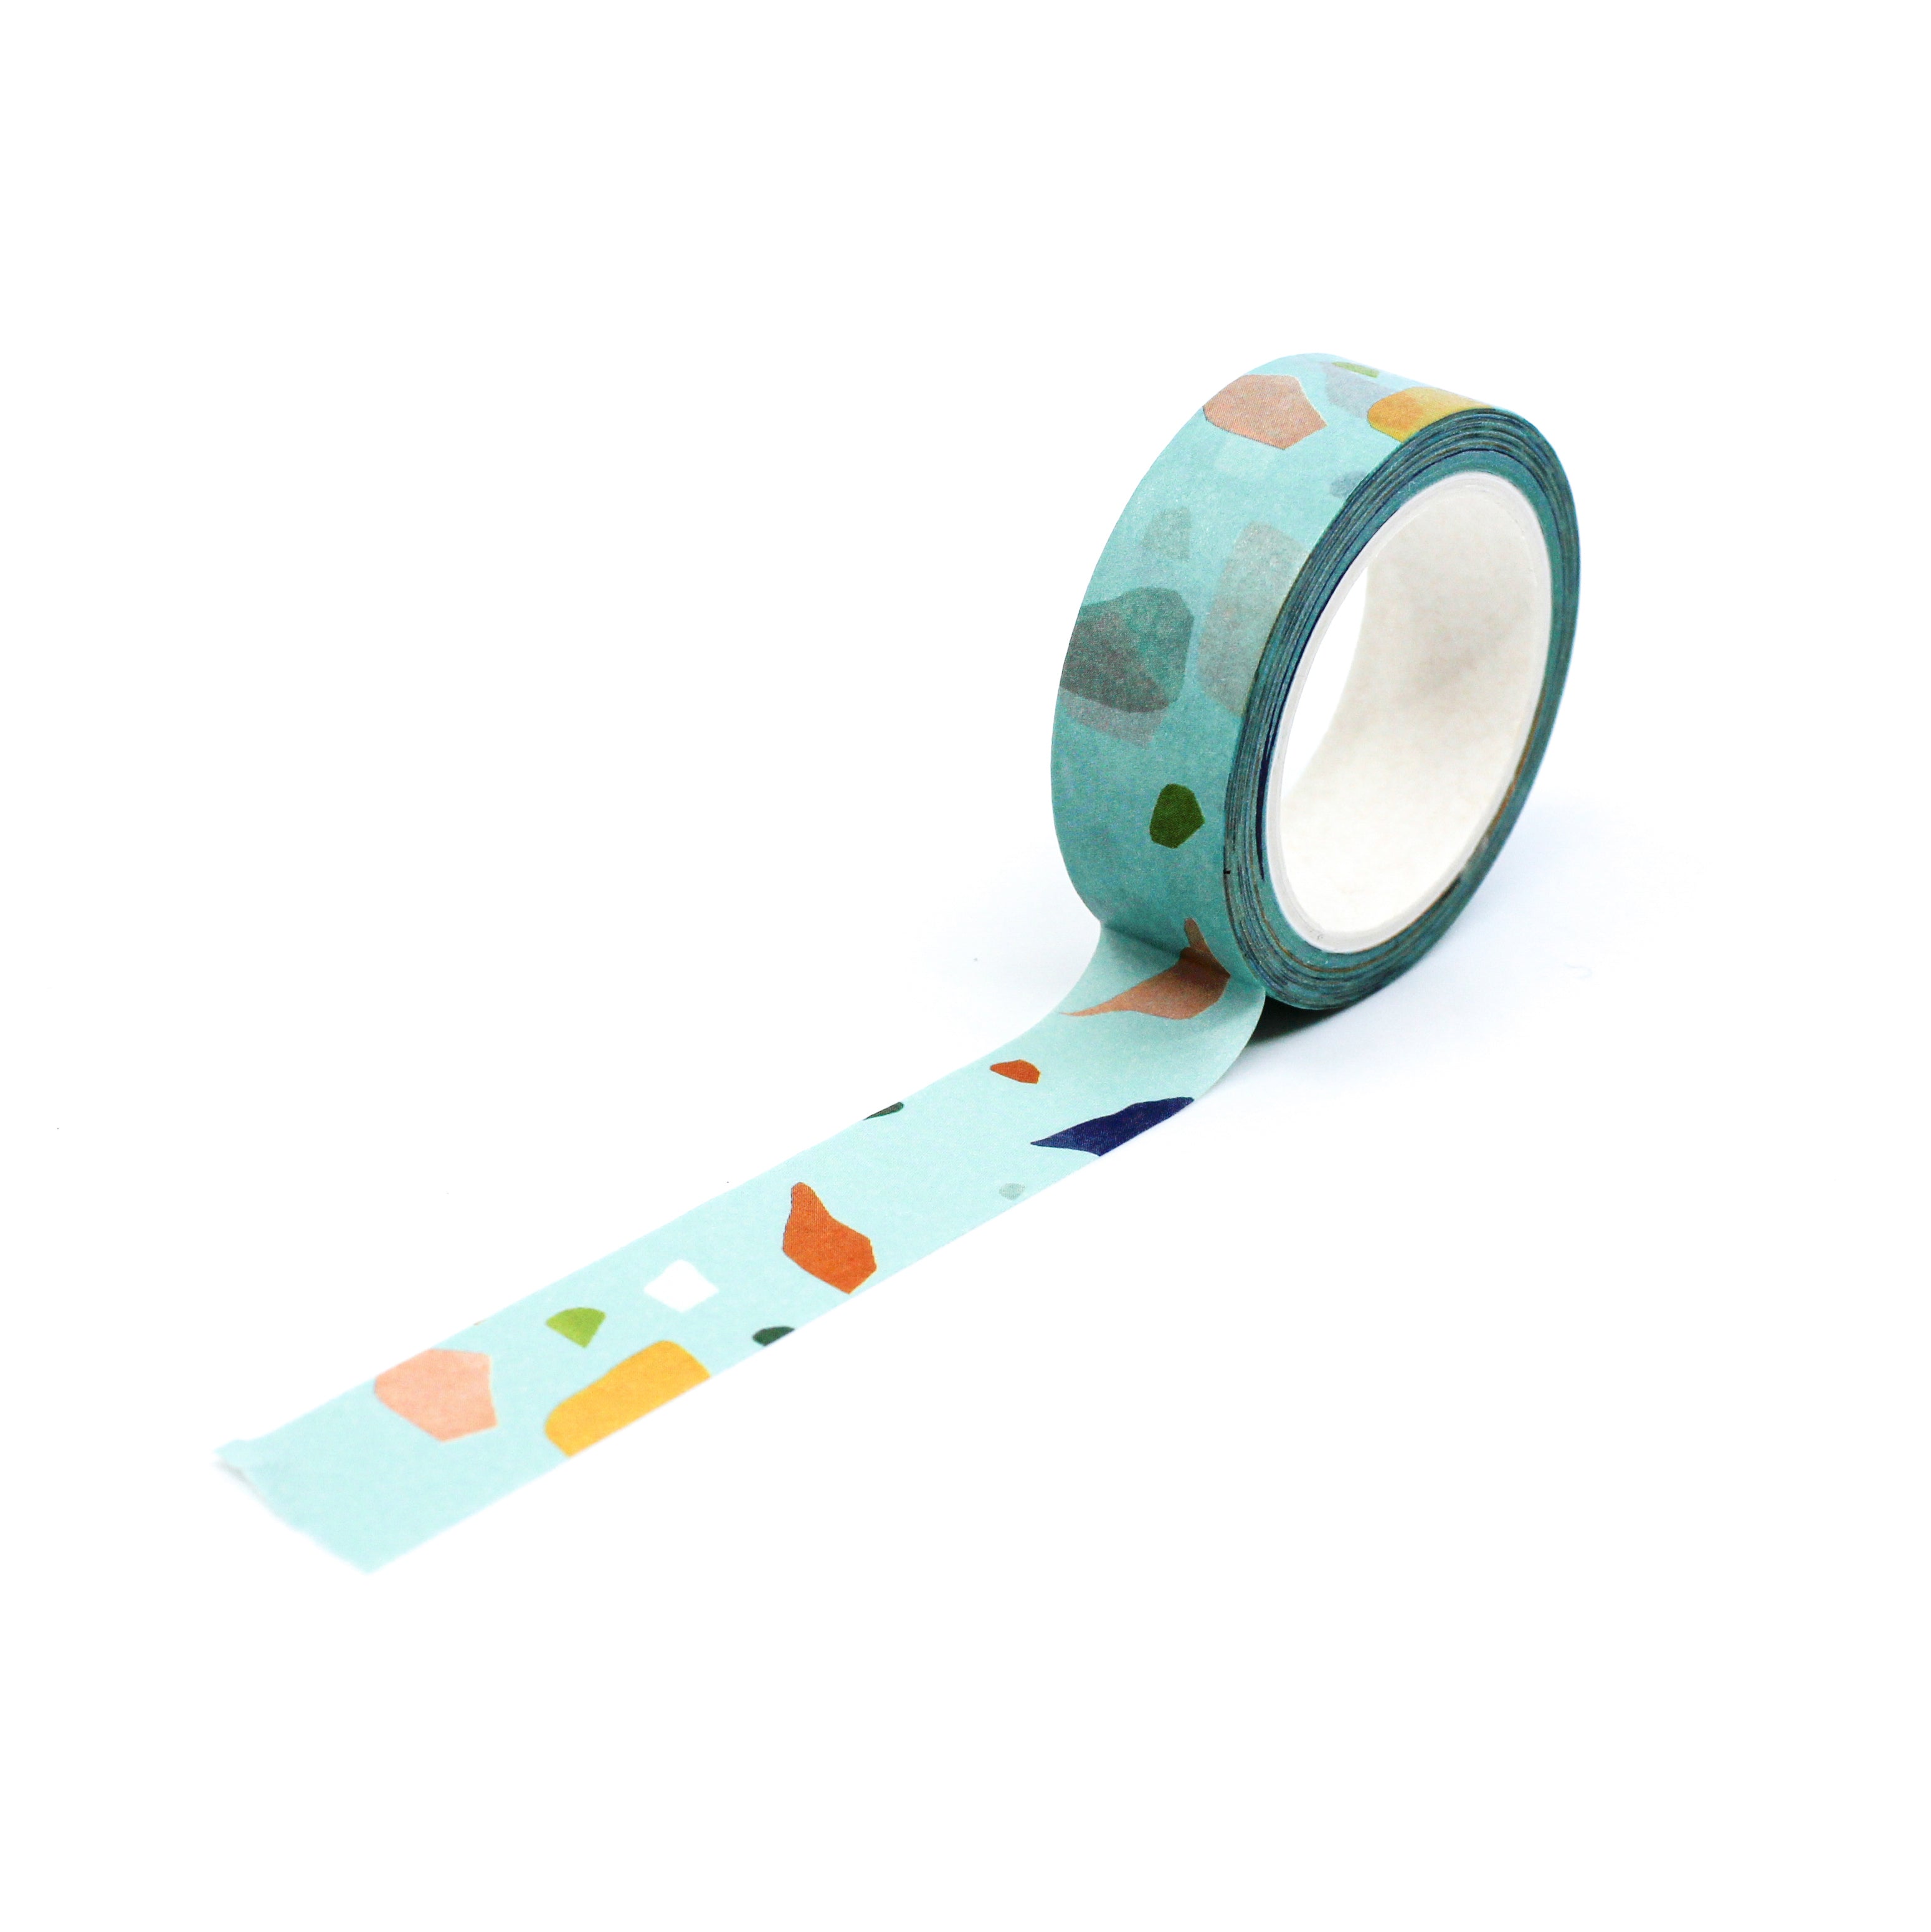 This is a full pattern repeat view of blue terrazzo natural stone style washi tape from BBB Supplies Craft Shop